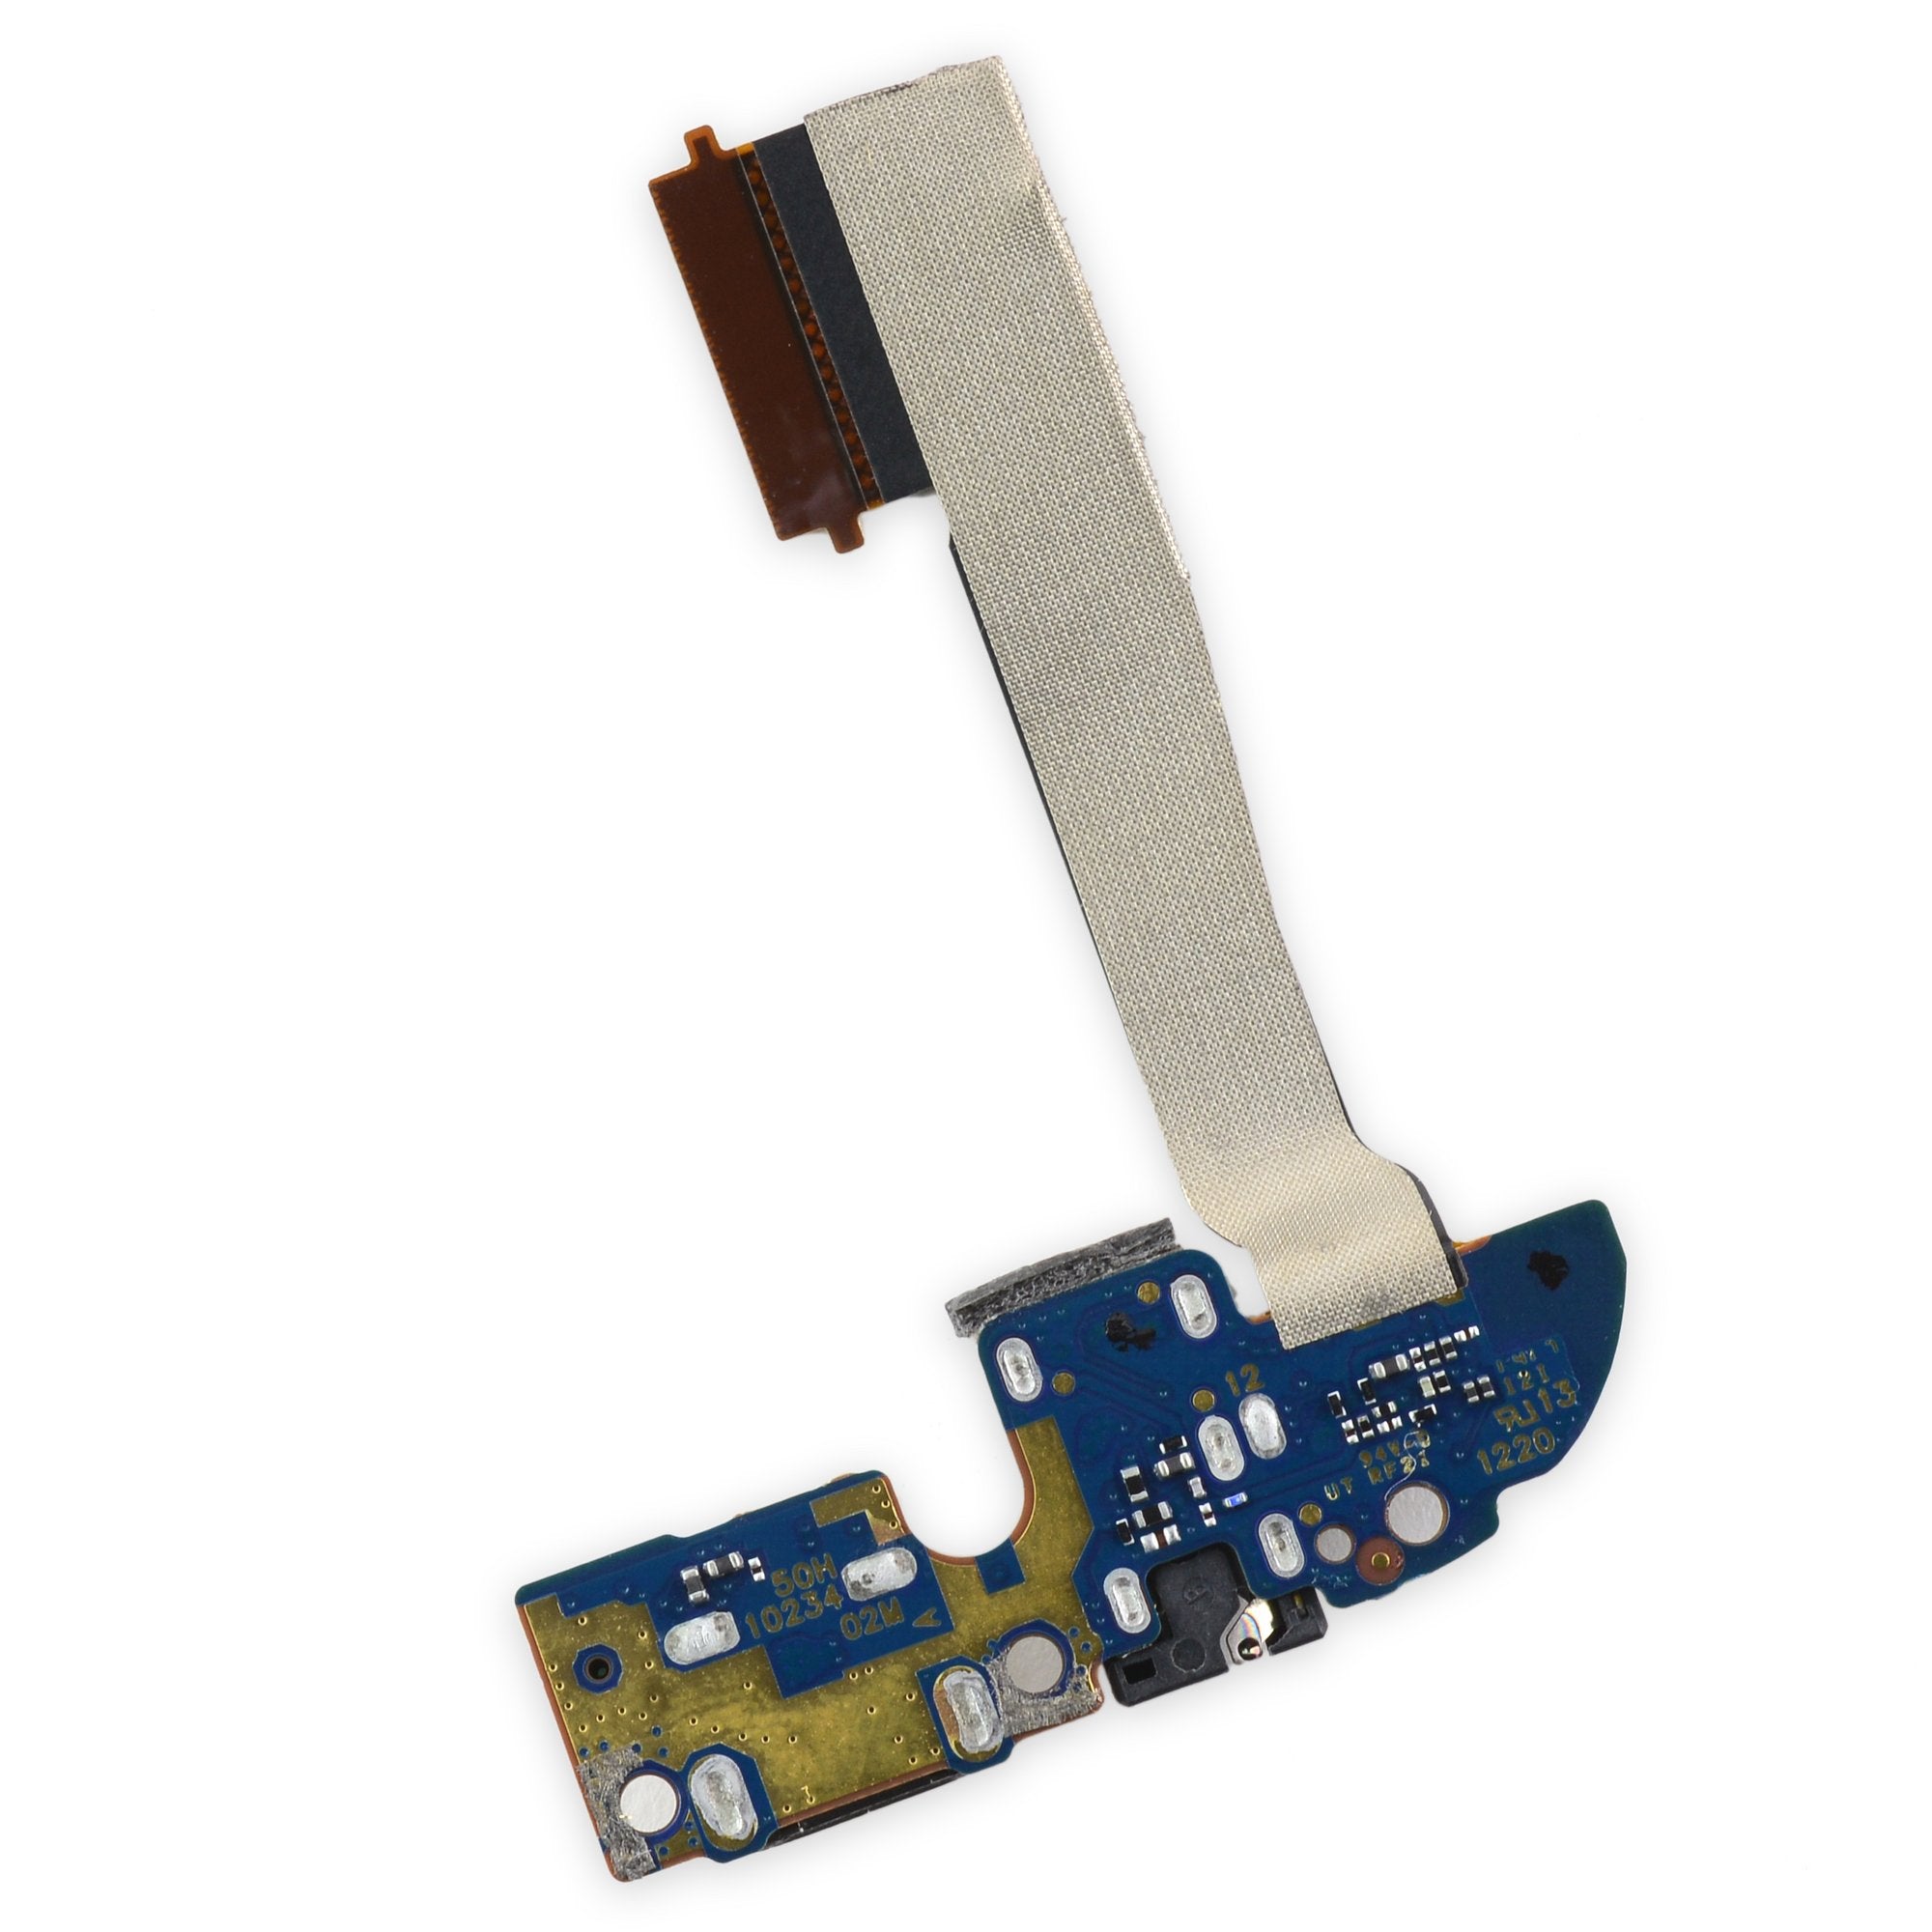 HTC One (M8, Verizon, AT&T, T-Mobile) Charging Assembly